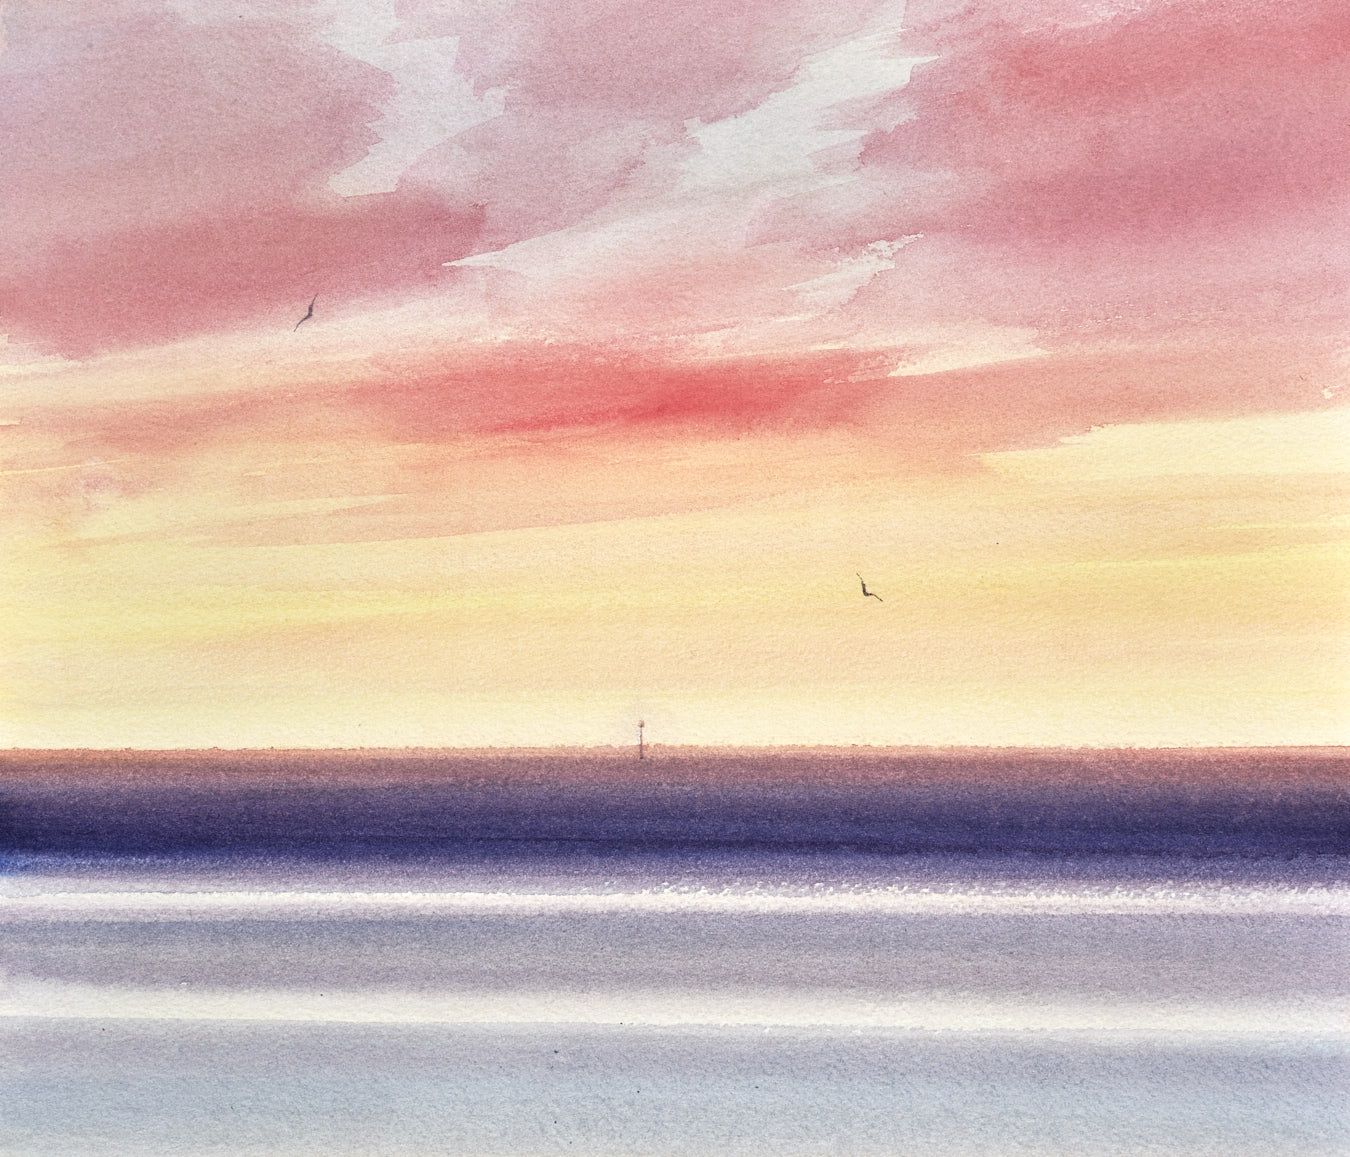 Large image of Twilight over the tide original watercolour painting